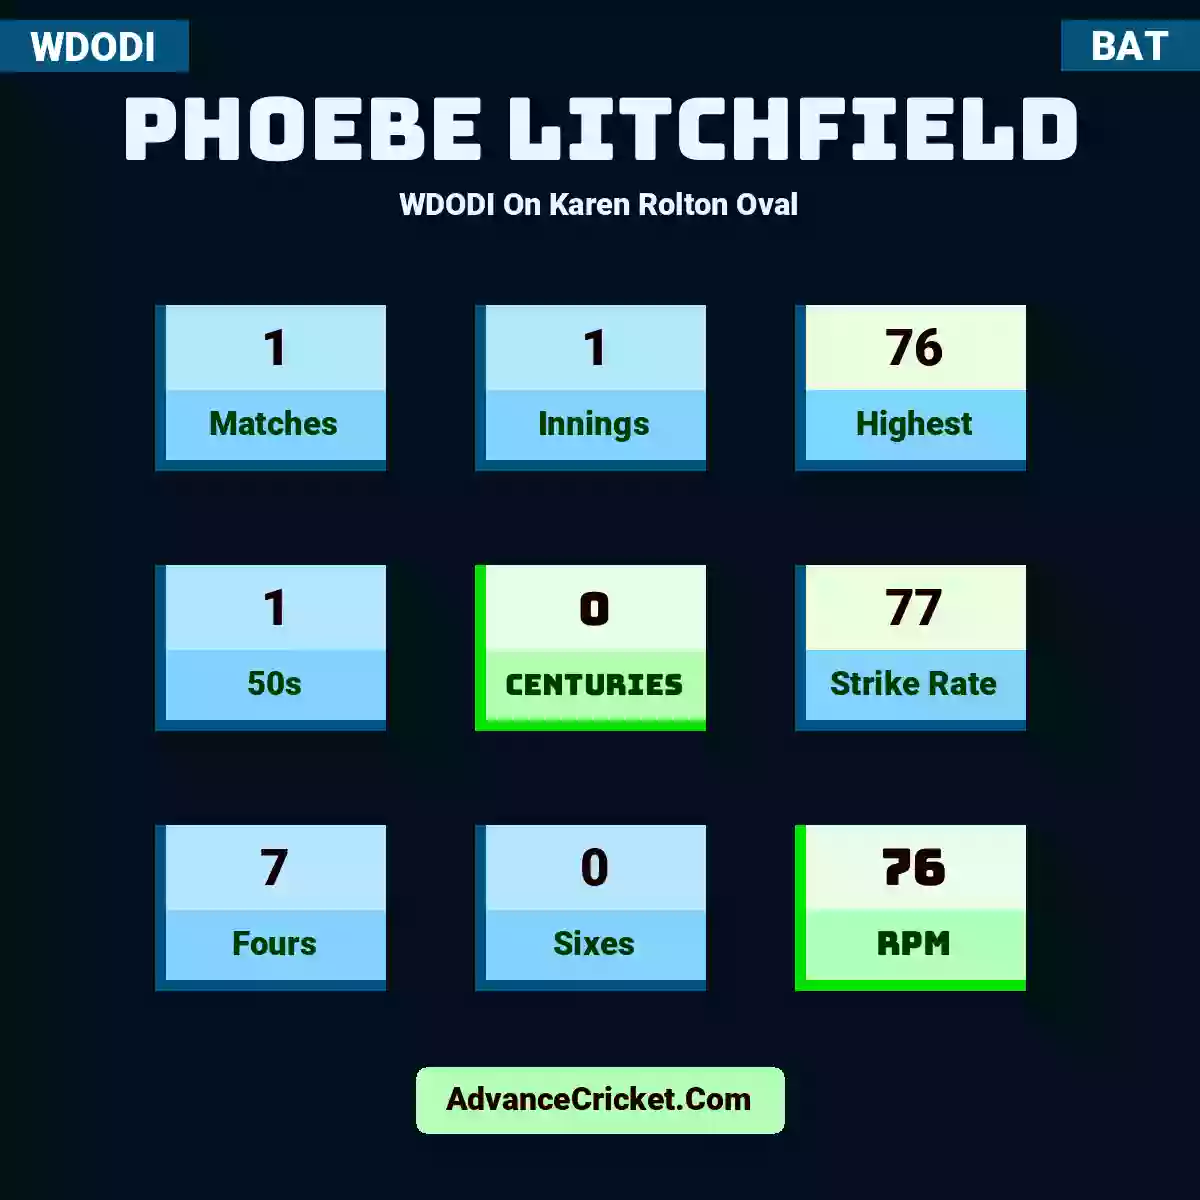 Phoebe Litchfield WDODI  On Karen Rolton Oval, Phoebe Litchfield played 1 matches, scored 76 runs as highest, 1 half-centuries, and 0 centuries, with a strike rate of 77. P.Litchfield hit 7 fours and 0 sixes, with an RPM of 76.